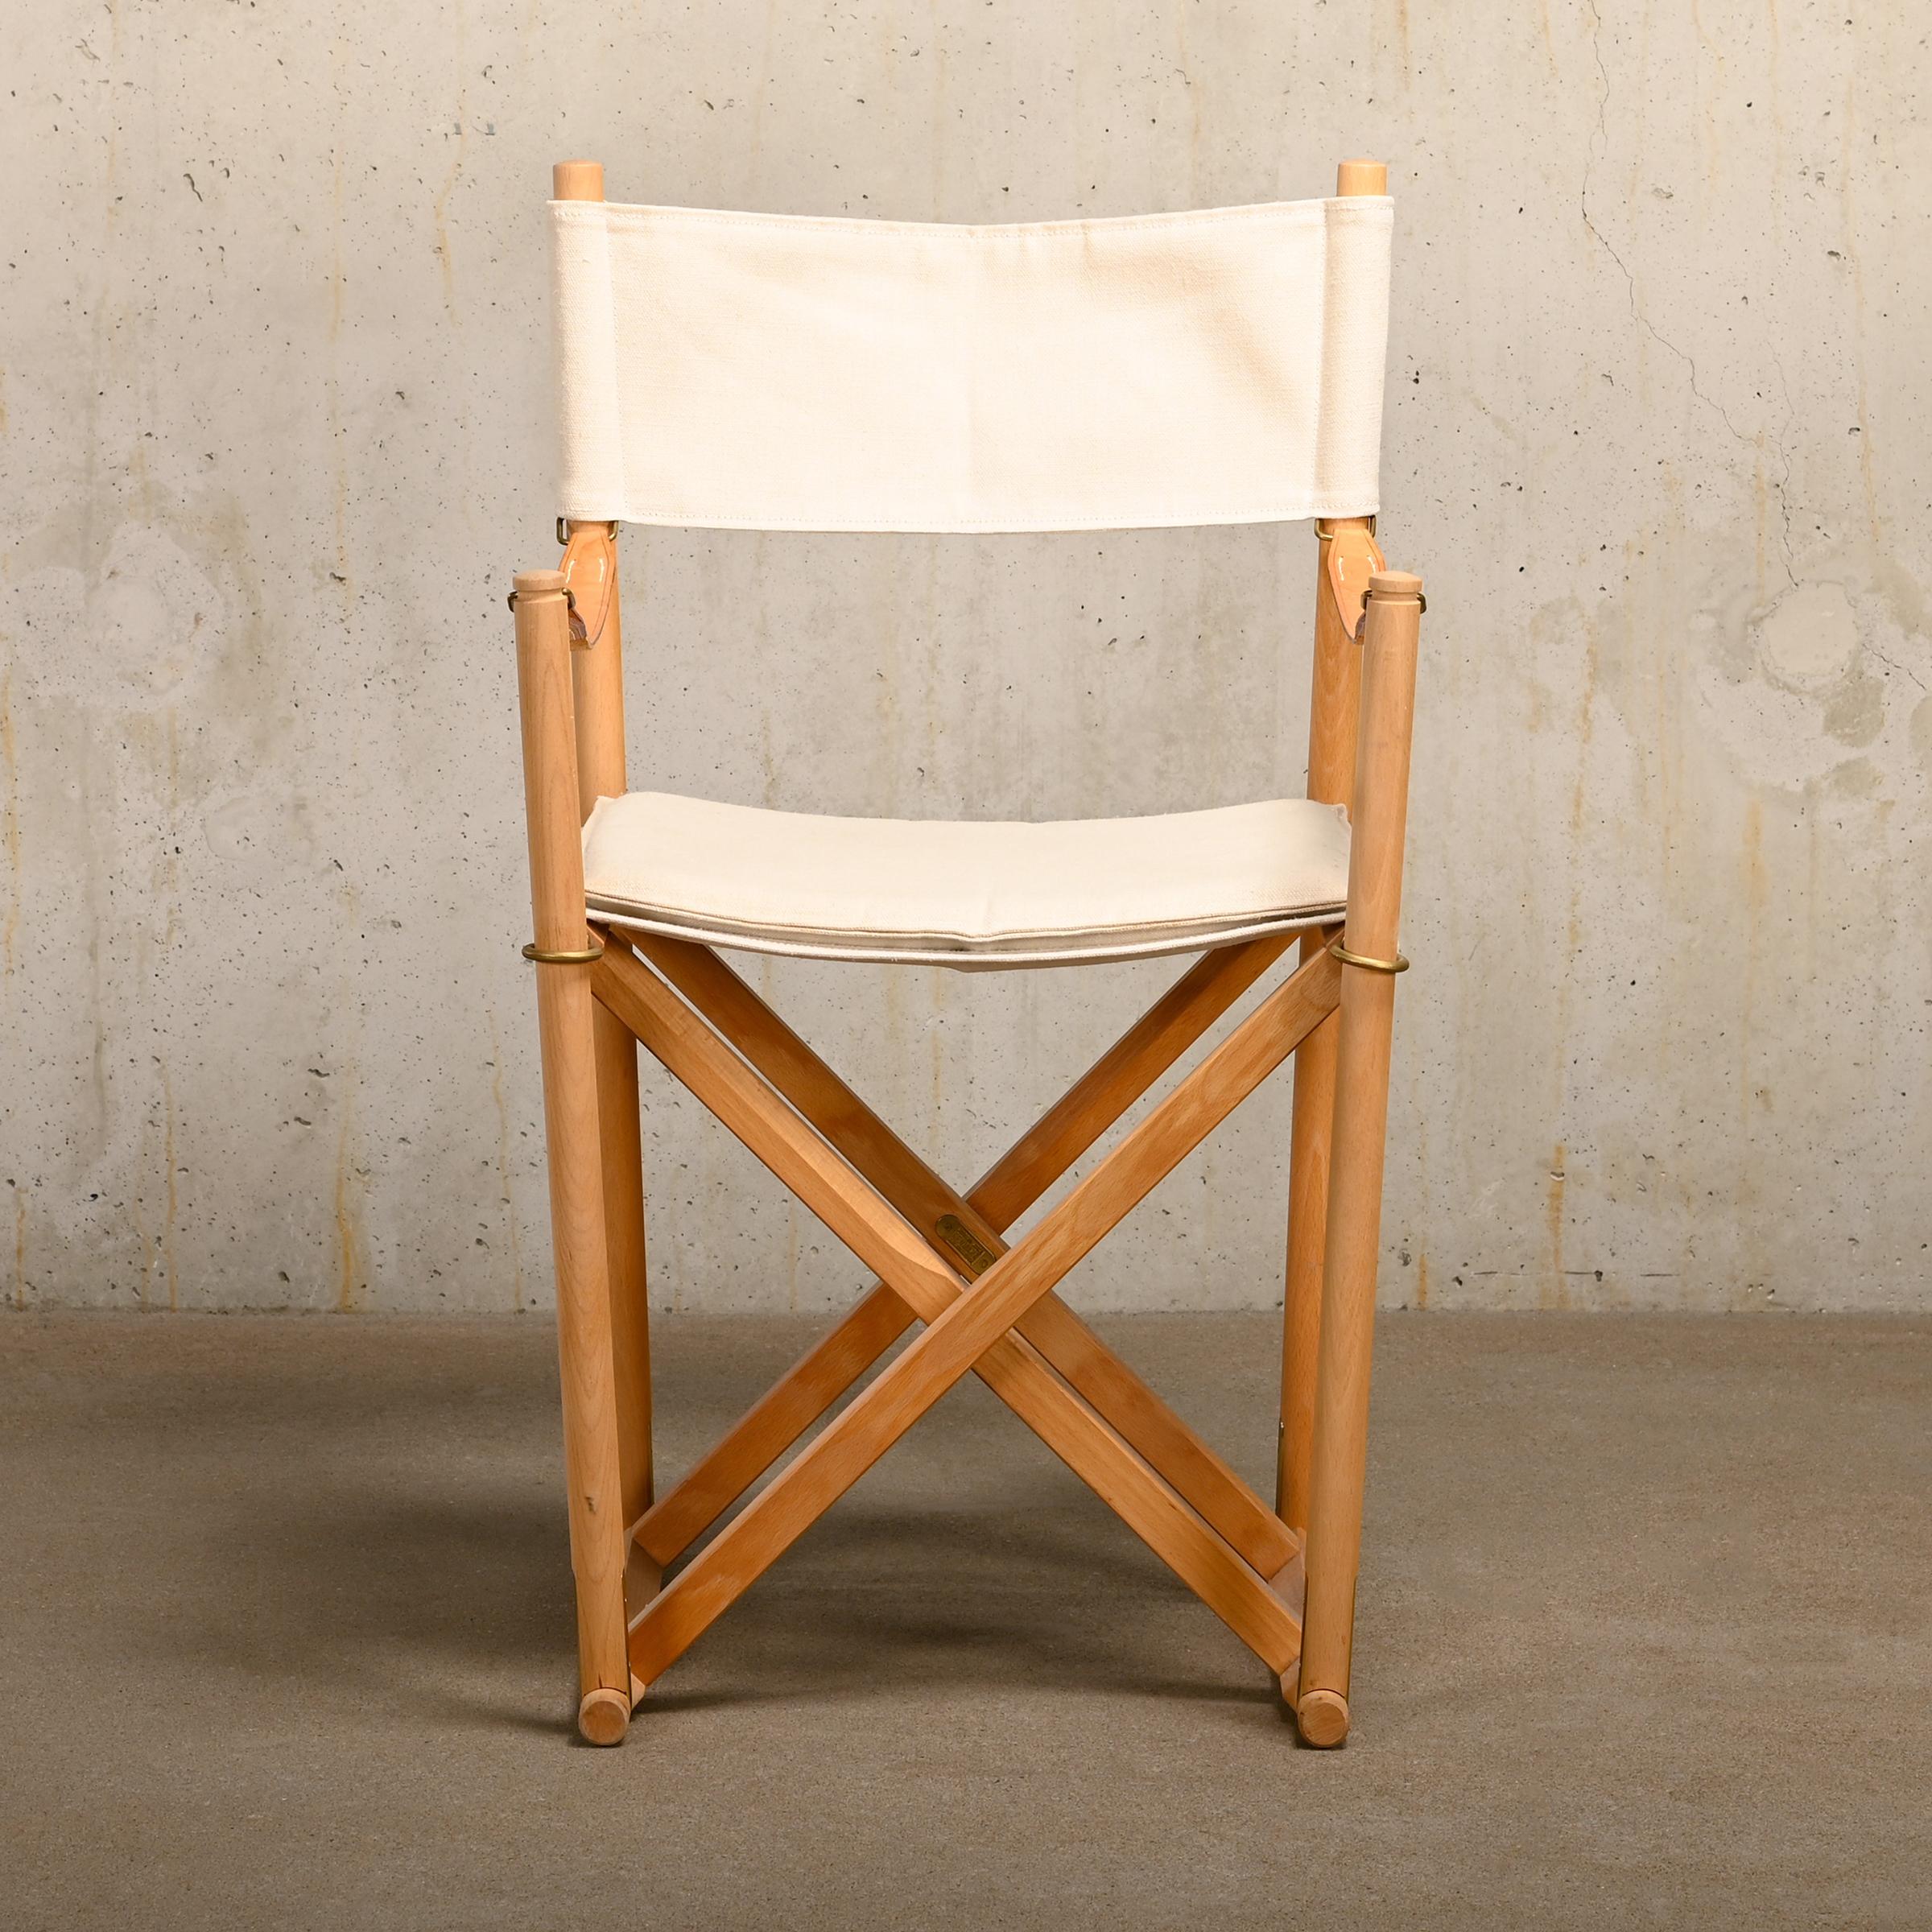 Beautiful made Folding Chairs (model MK16) designed by Mogens Koch in the early thirties. This example is manufactured by Rud Rasmussen and features a beech wood frame with brass fittings and canvas upholstery and canvas cushion with full-grain